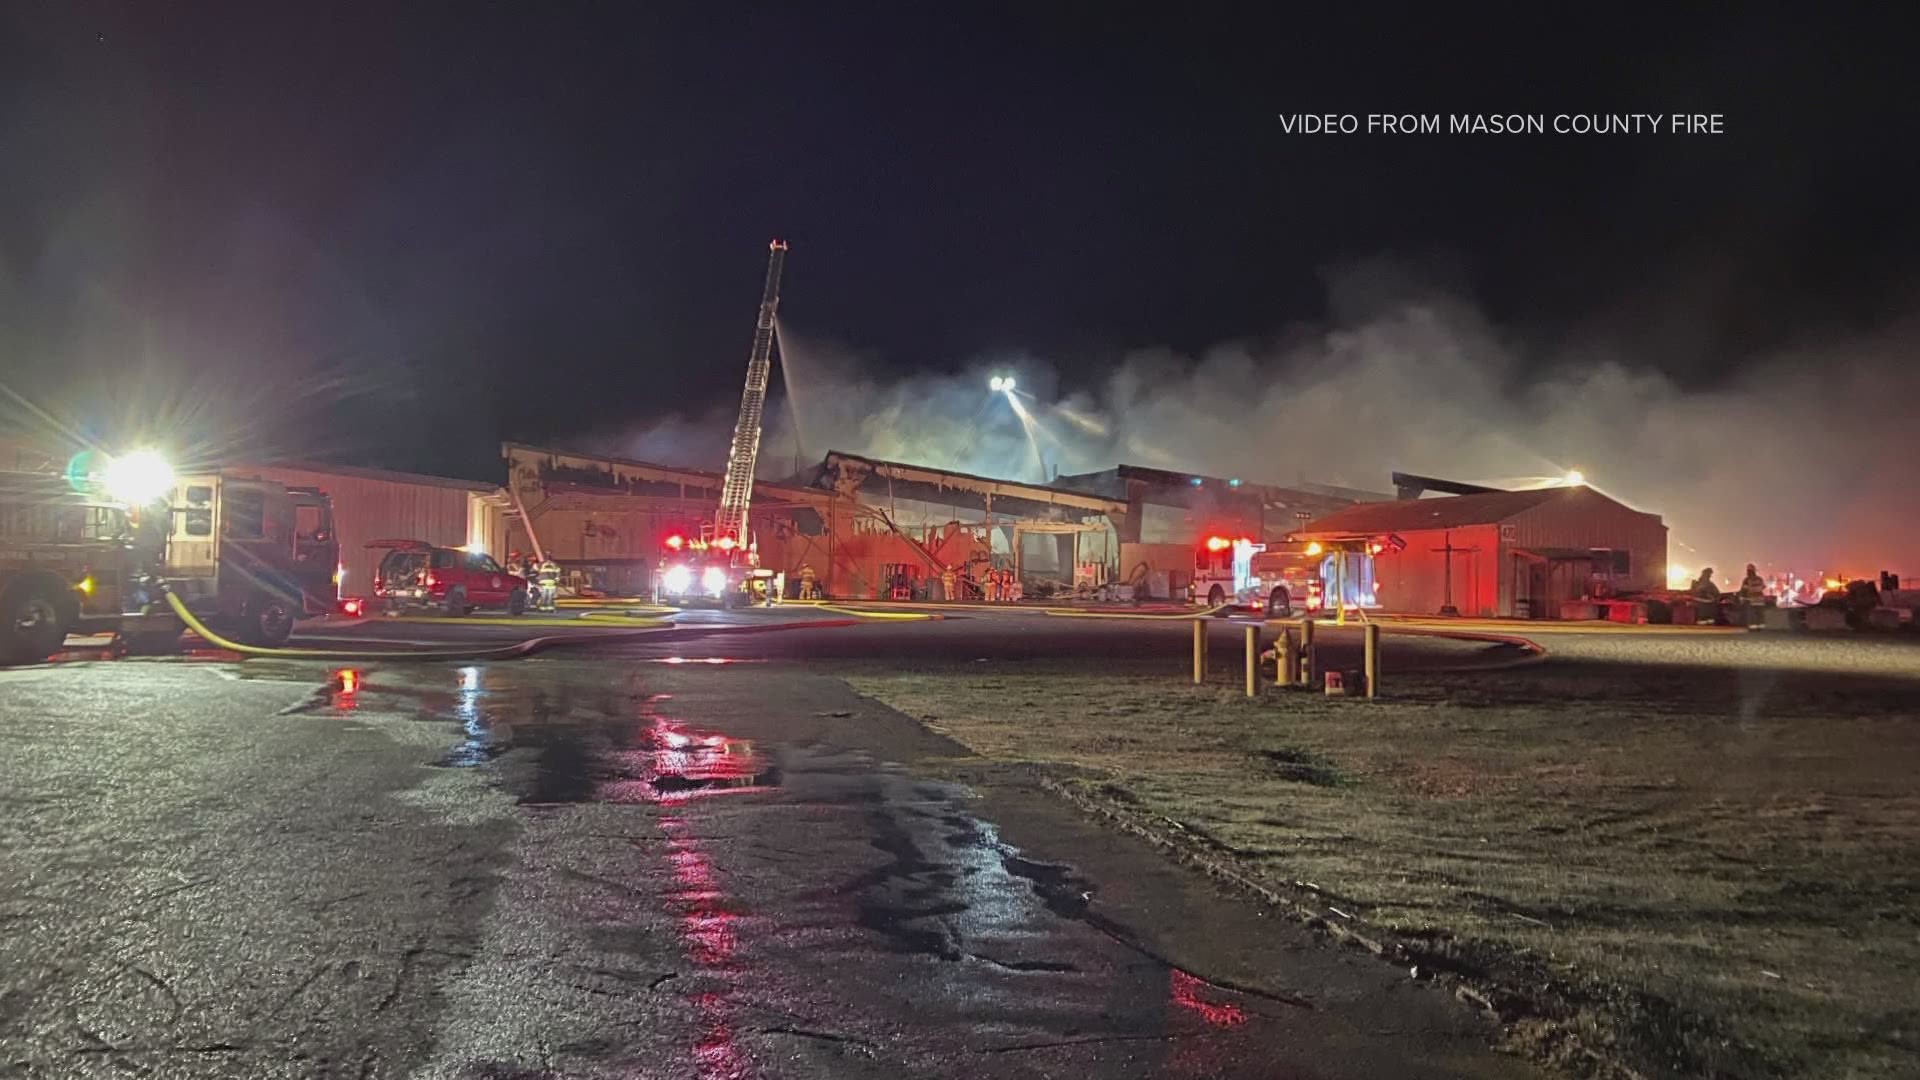 The three alarm fire destroyed a large manufacturing business.  No injuries were reported.